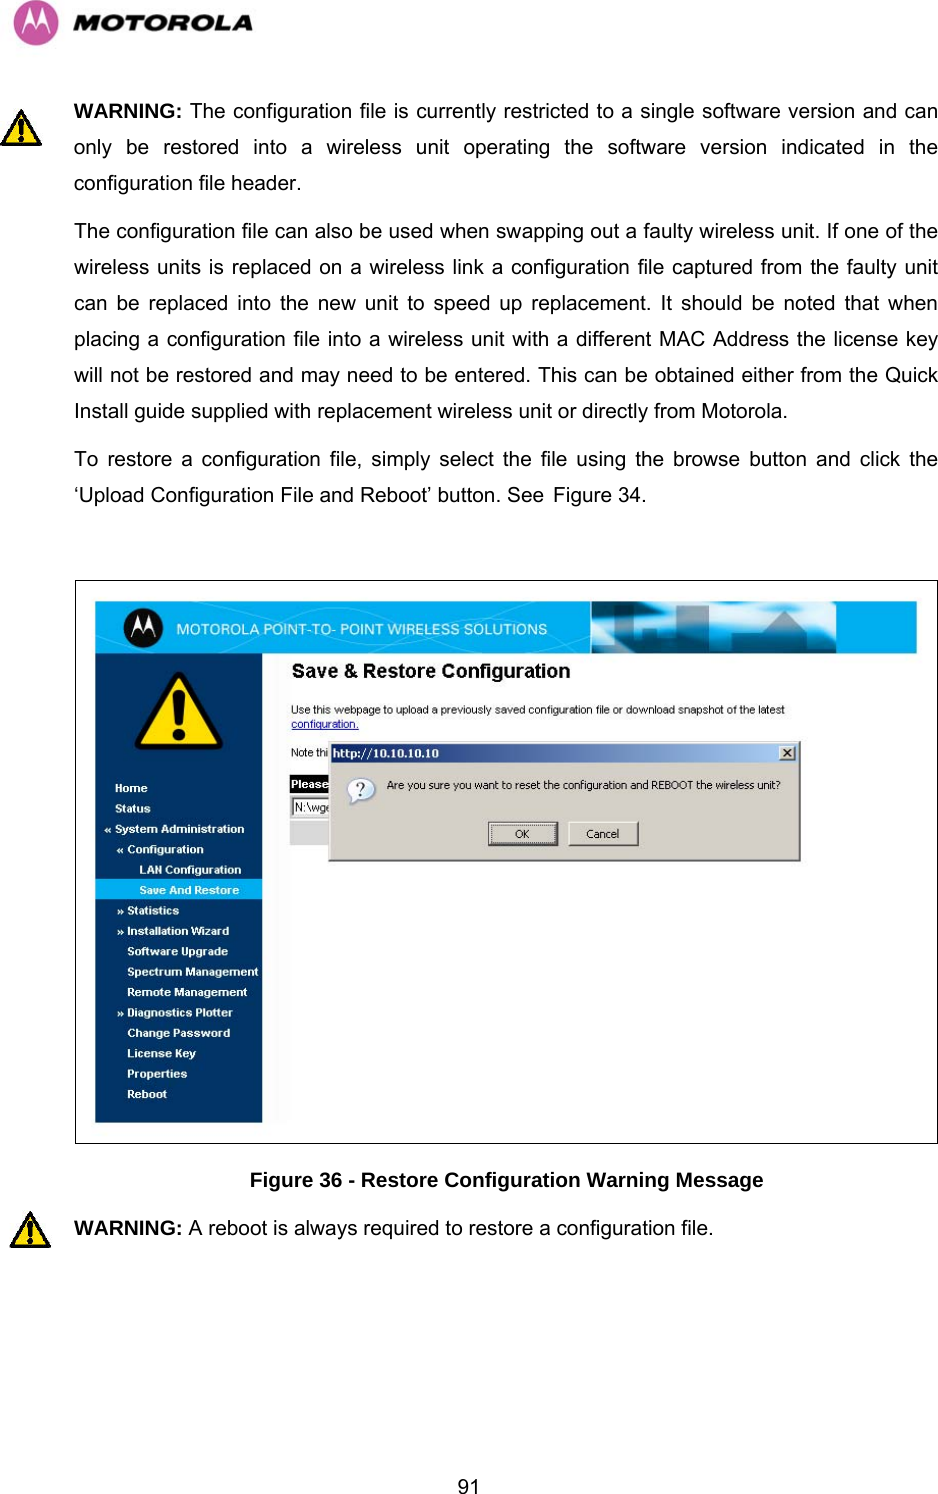   91WARNING: The configuration file is currently restricted to a single software version and can only be restored into a wireless unit operating the software version indicated in the configuration file header. The configuration file can also be used when swapping out a faulty wireless unit. If one of the wireless units is replaced on a wireless link a configuration file captured from the faulty unit can be replaced into the new unit to speed up replacement. It should be noted that when placing a configuration file into a wireless unit with a different MAC Address the license key will not be restored and may need to be entered. This can be obtained either from the Quick Install guide supplied with replacement wireless unit or directly from Motorola. To restore a configuration file, simply select the file using the browse button and click the ‘Upload Configuration File and Reboot’ button. See HFigure 34.   Figure 36 - Restore Configuration Warning Message WARNING: A reboot is always required to restore a configuration file. 